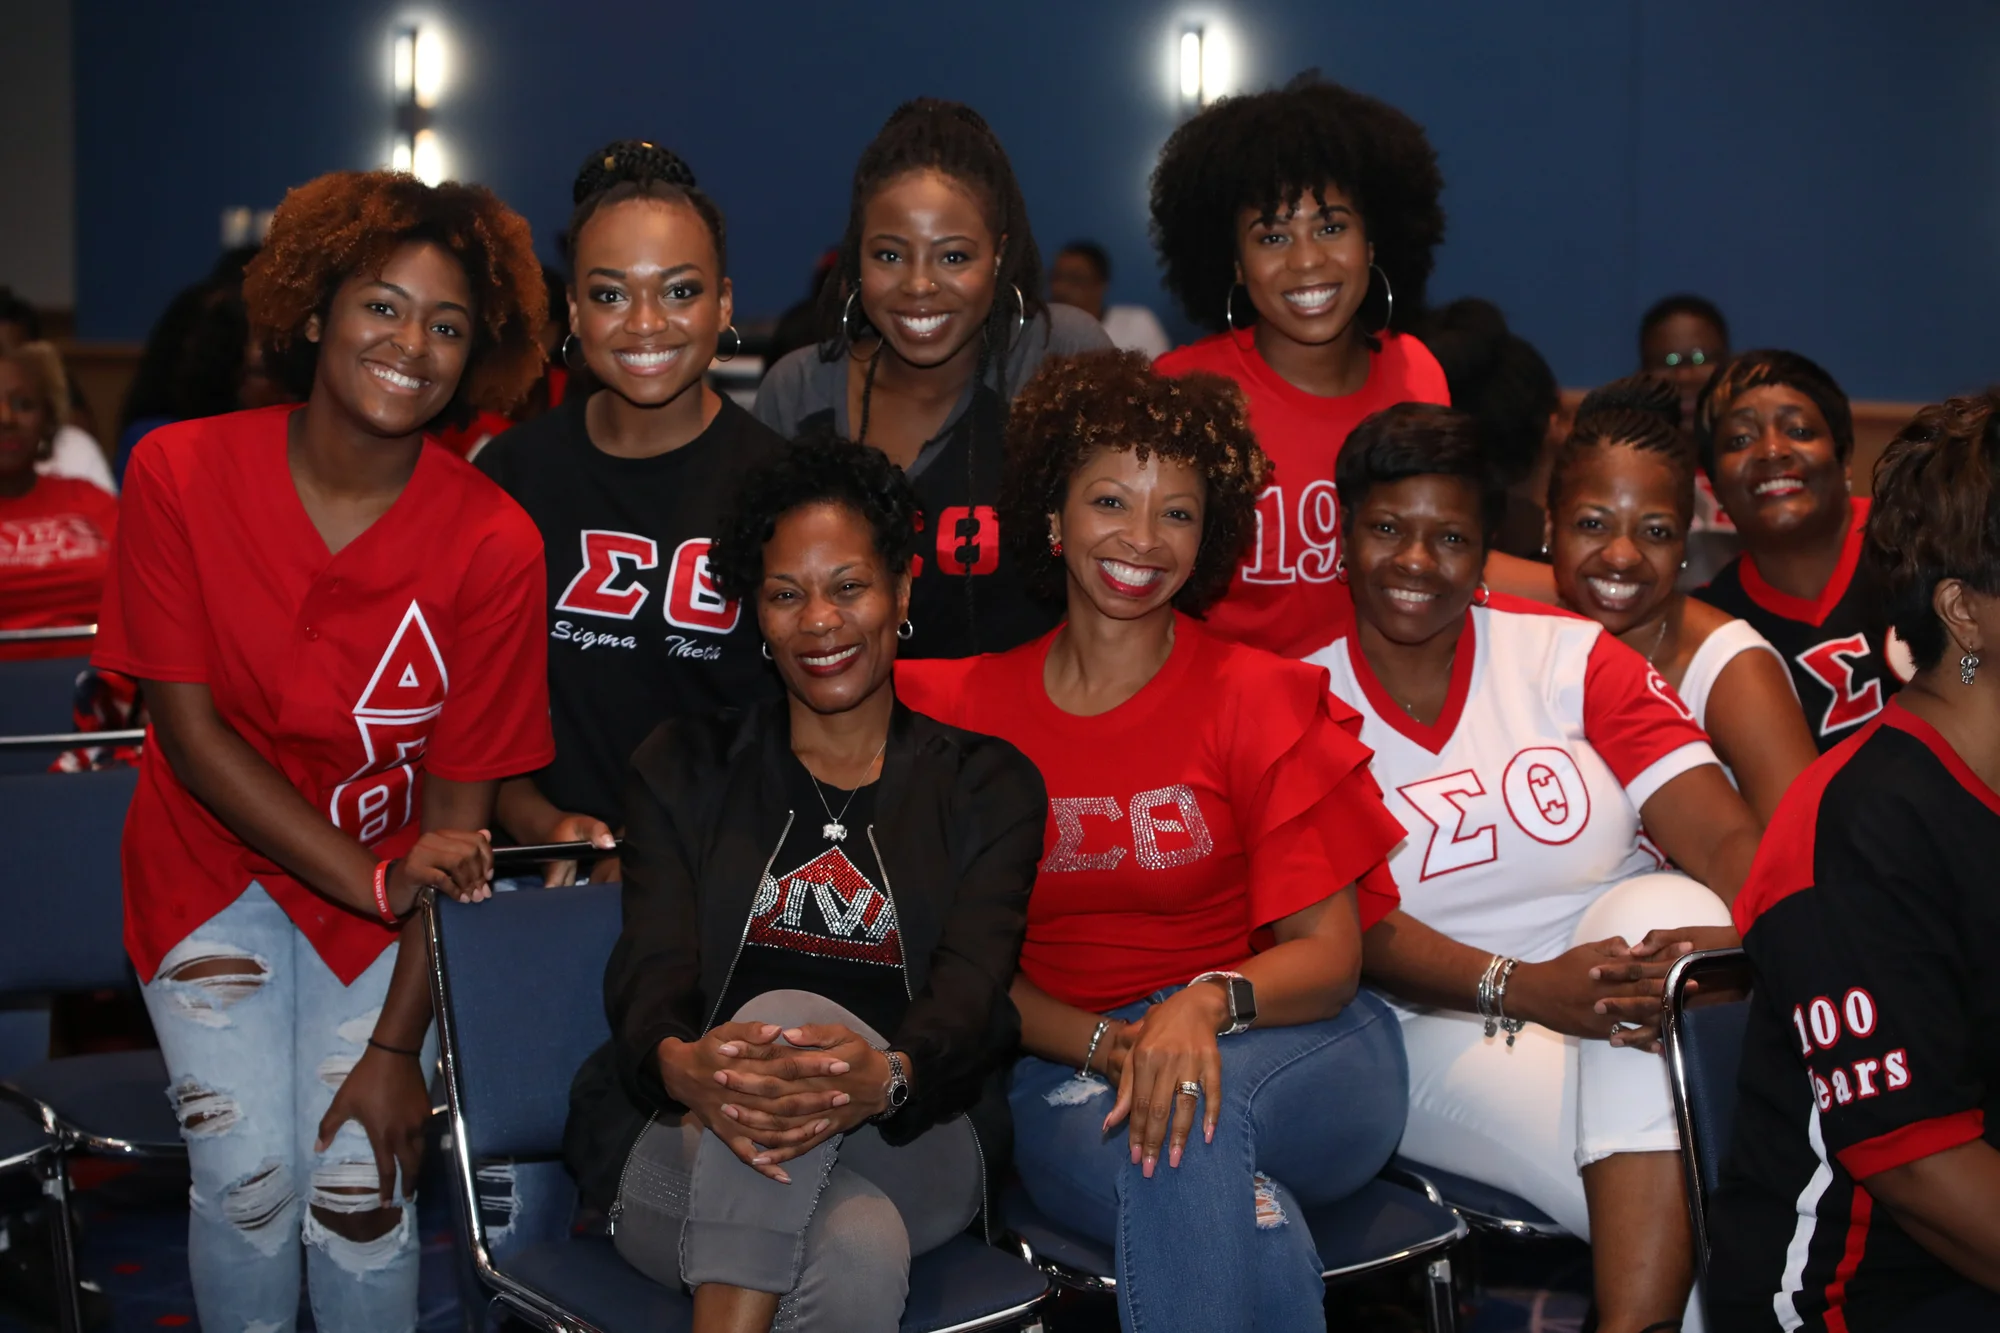 A group of women wearing red and black Delta Sigma Theta sorority apparel